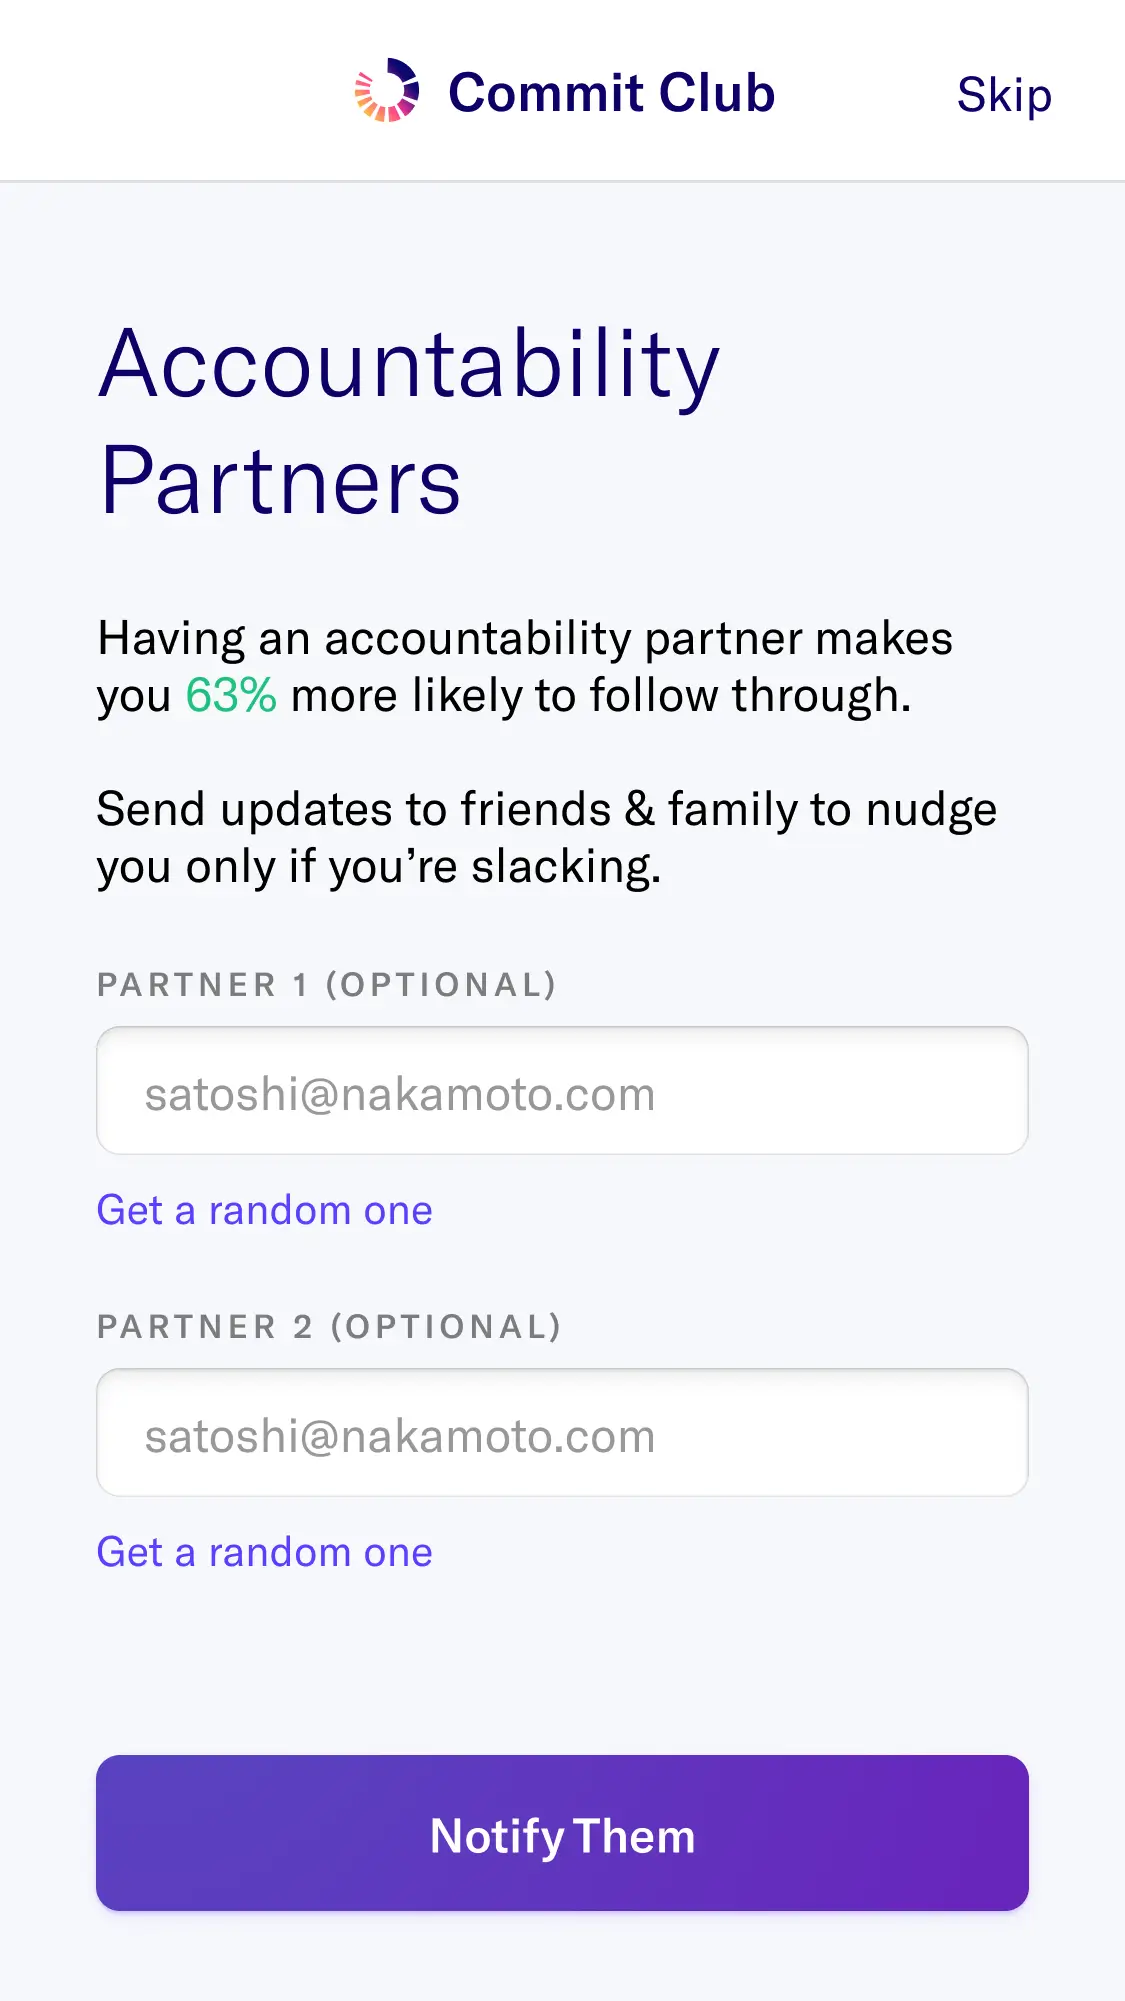 Find an accountability partner online or just use a friend